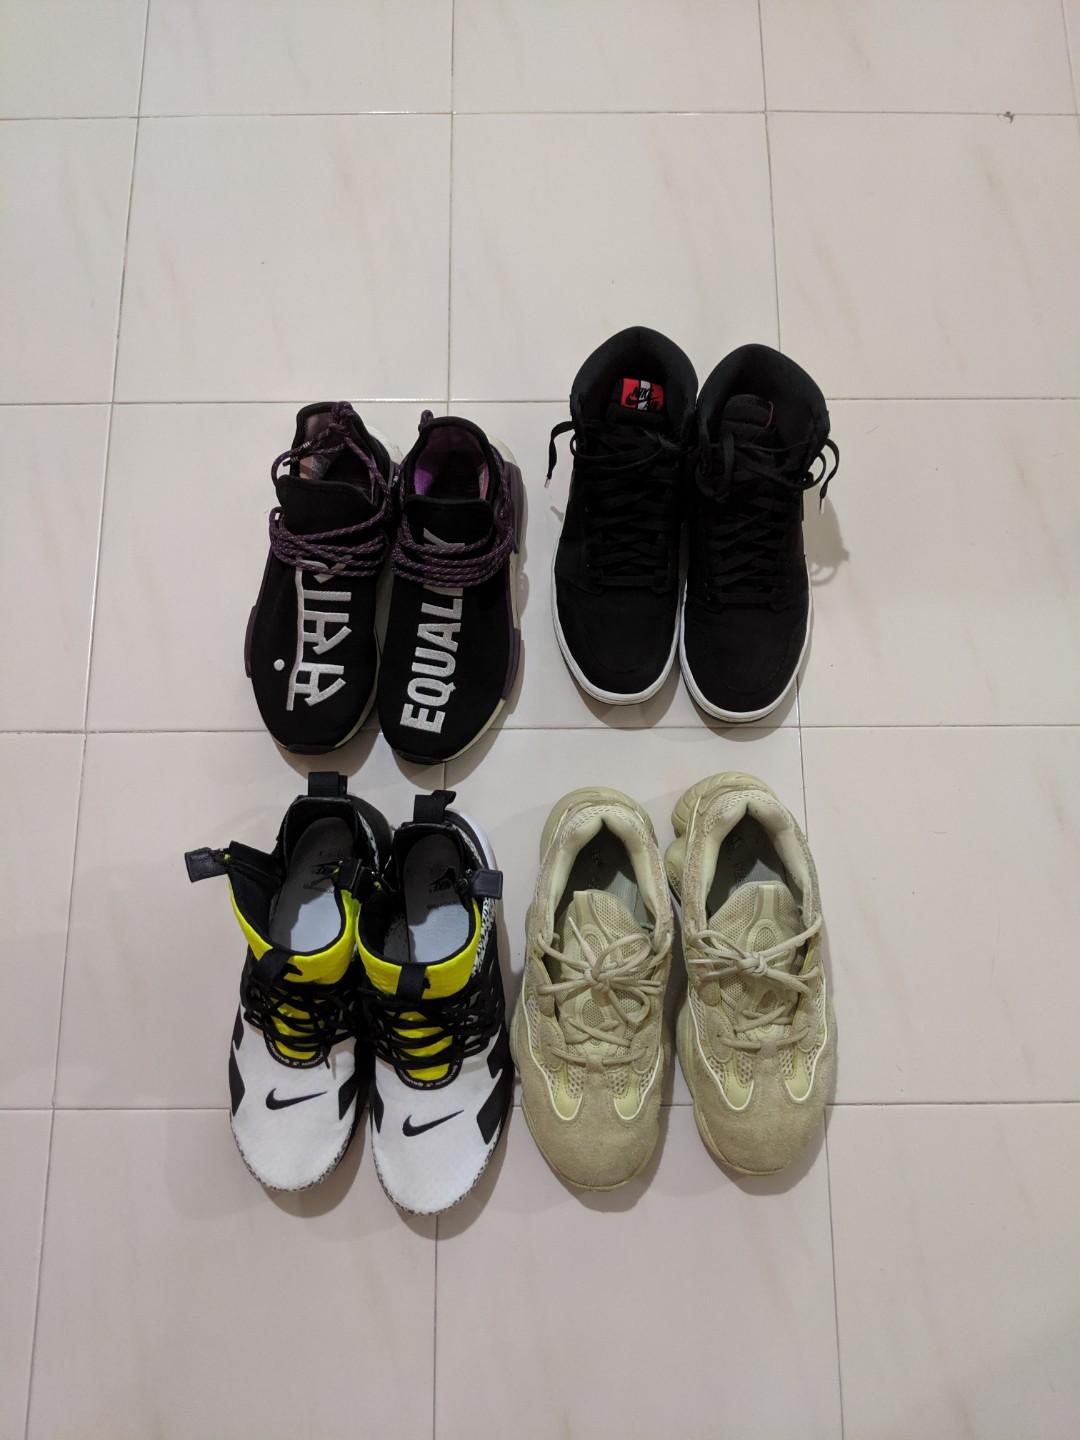 hypebeast shoes for sale